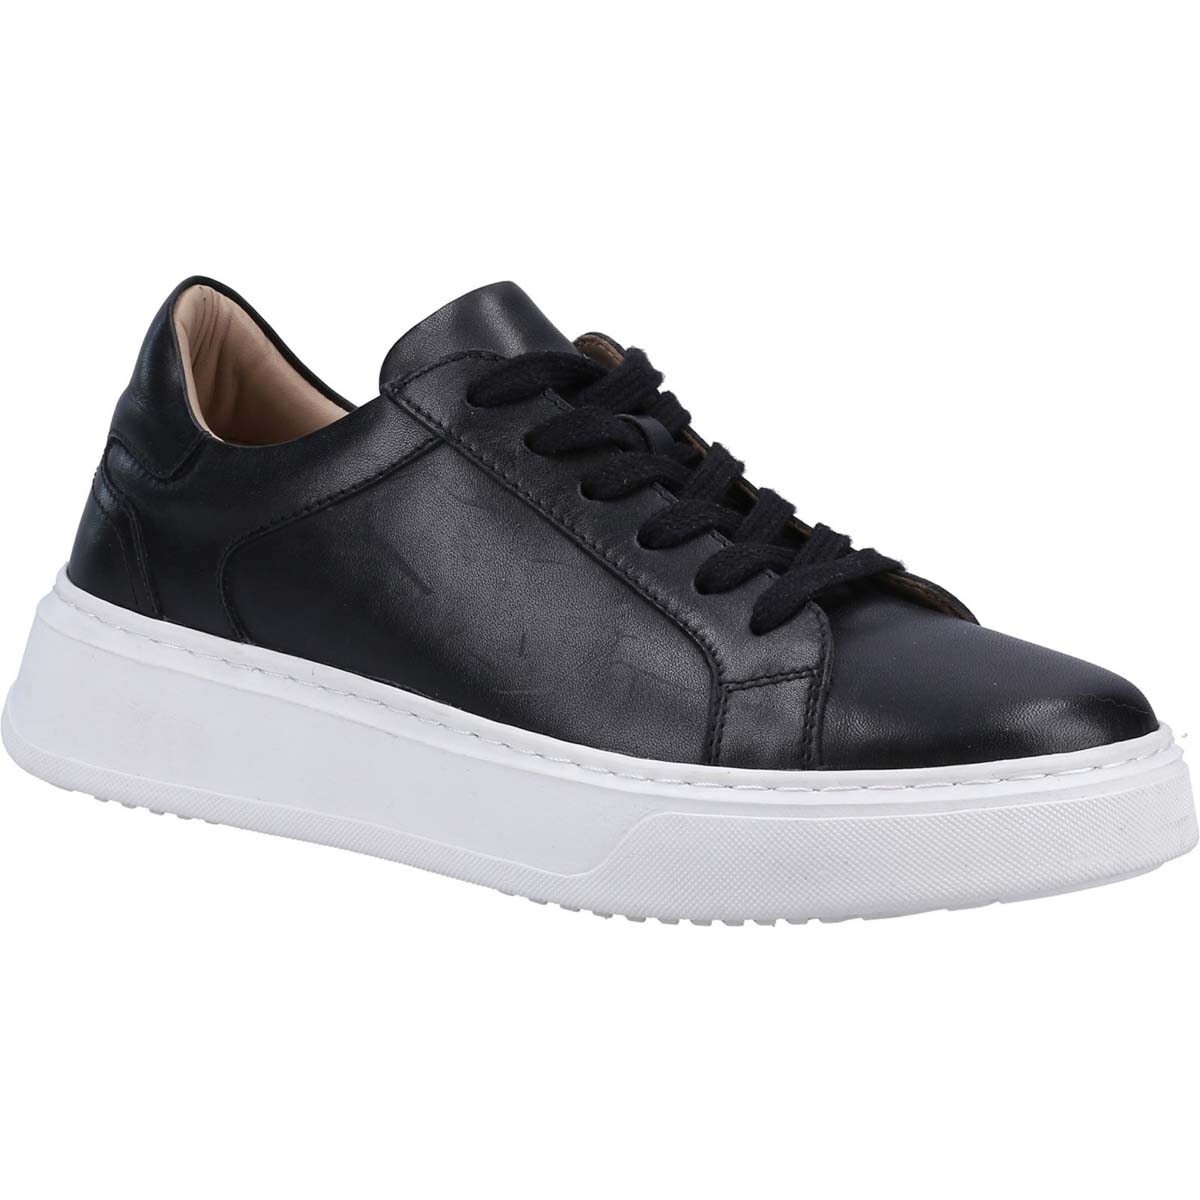 Hush Puppies Camille Black Womens trainers 36580-68191 in a Plain Leather in Size 5